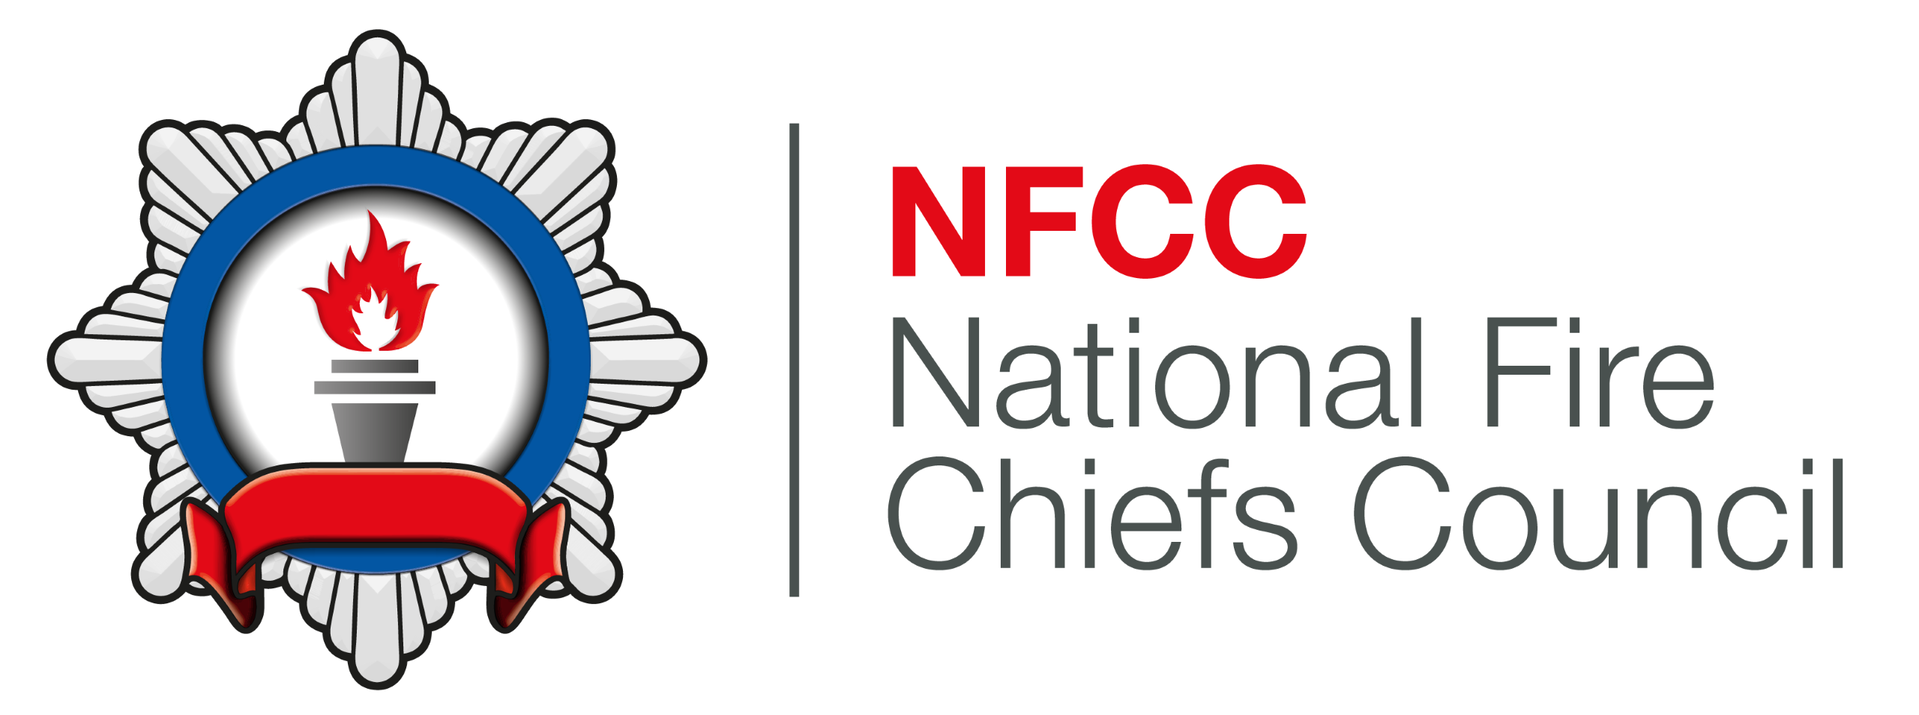 NFCC to launch pioneering Direct Entry Scheme 